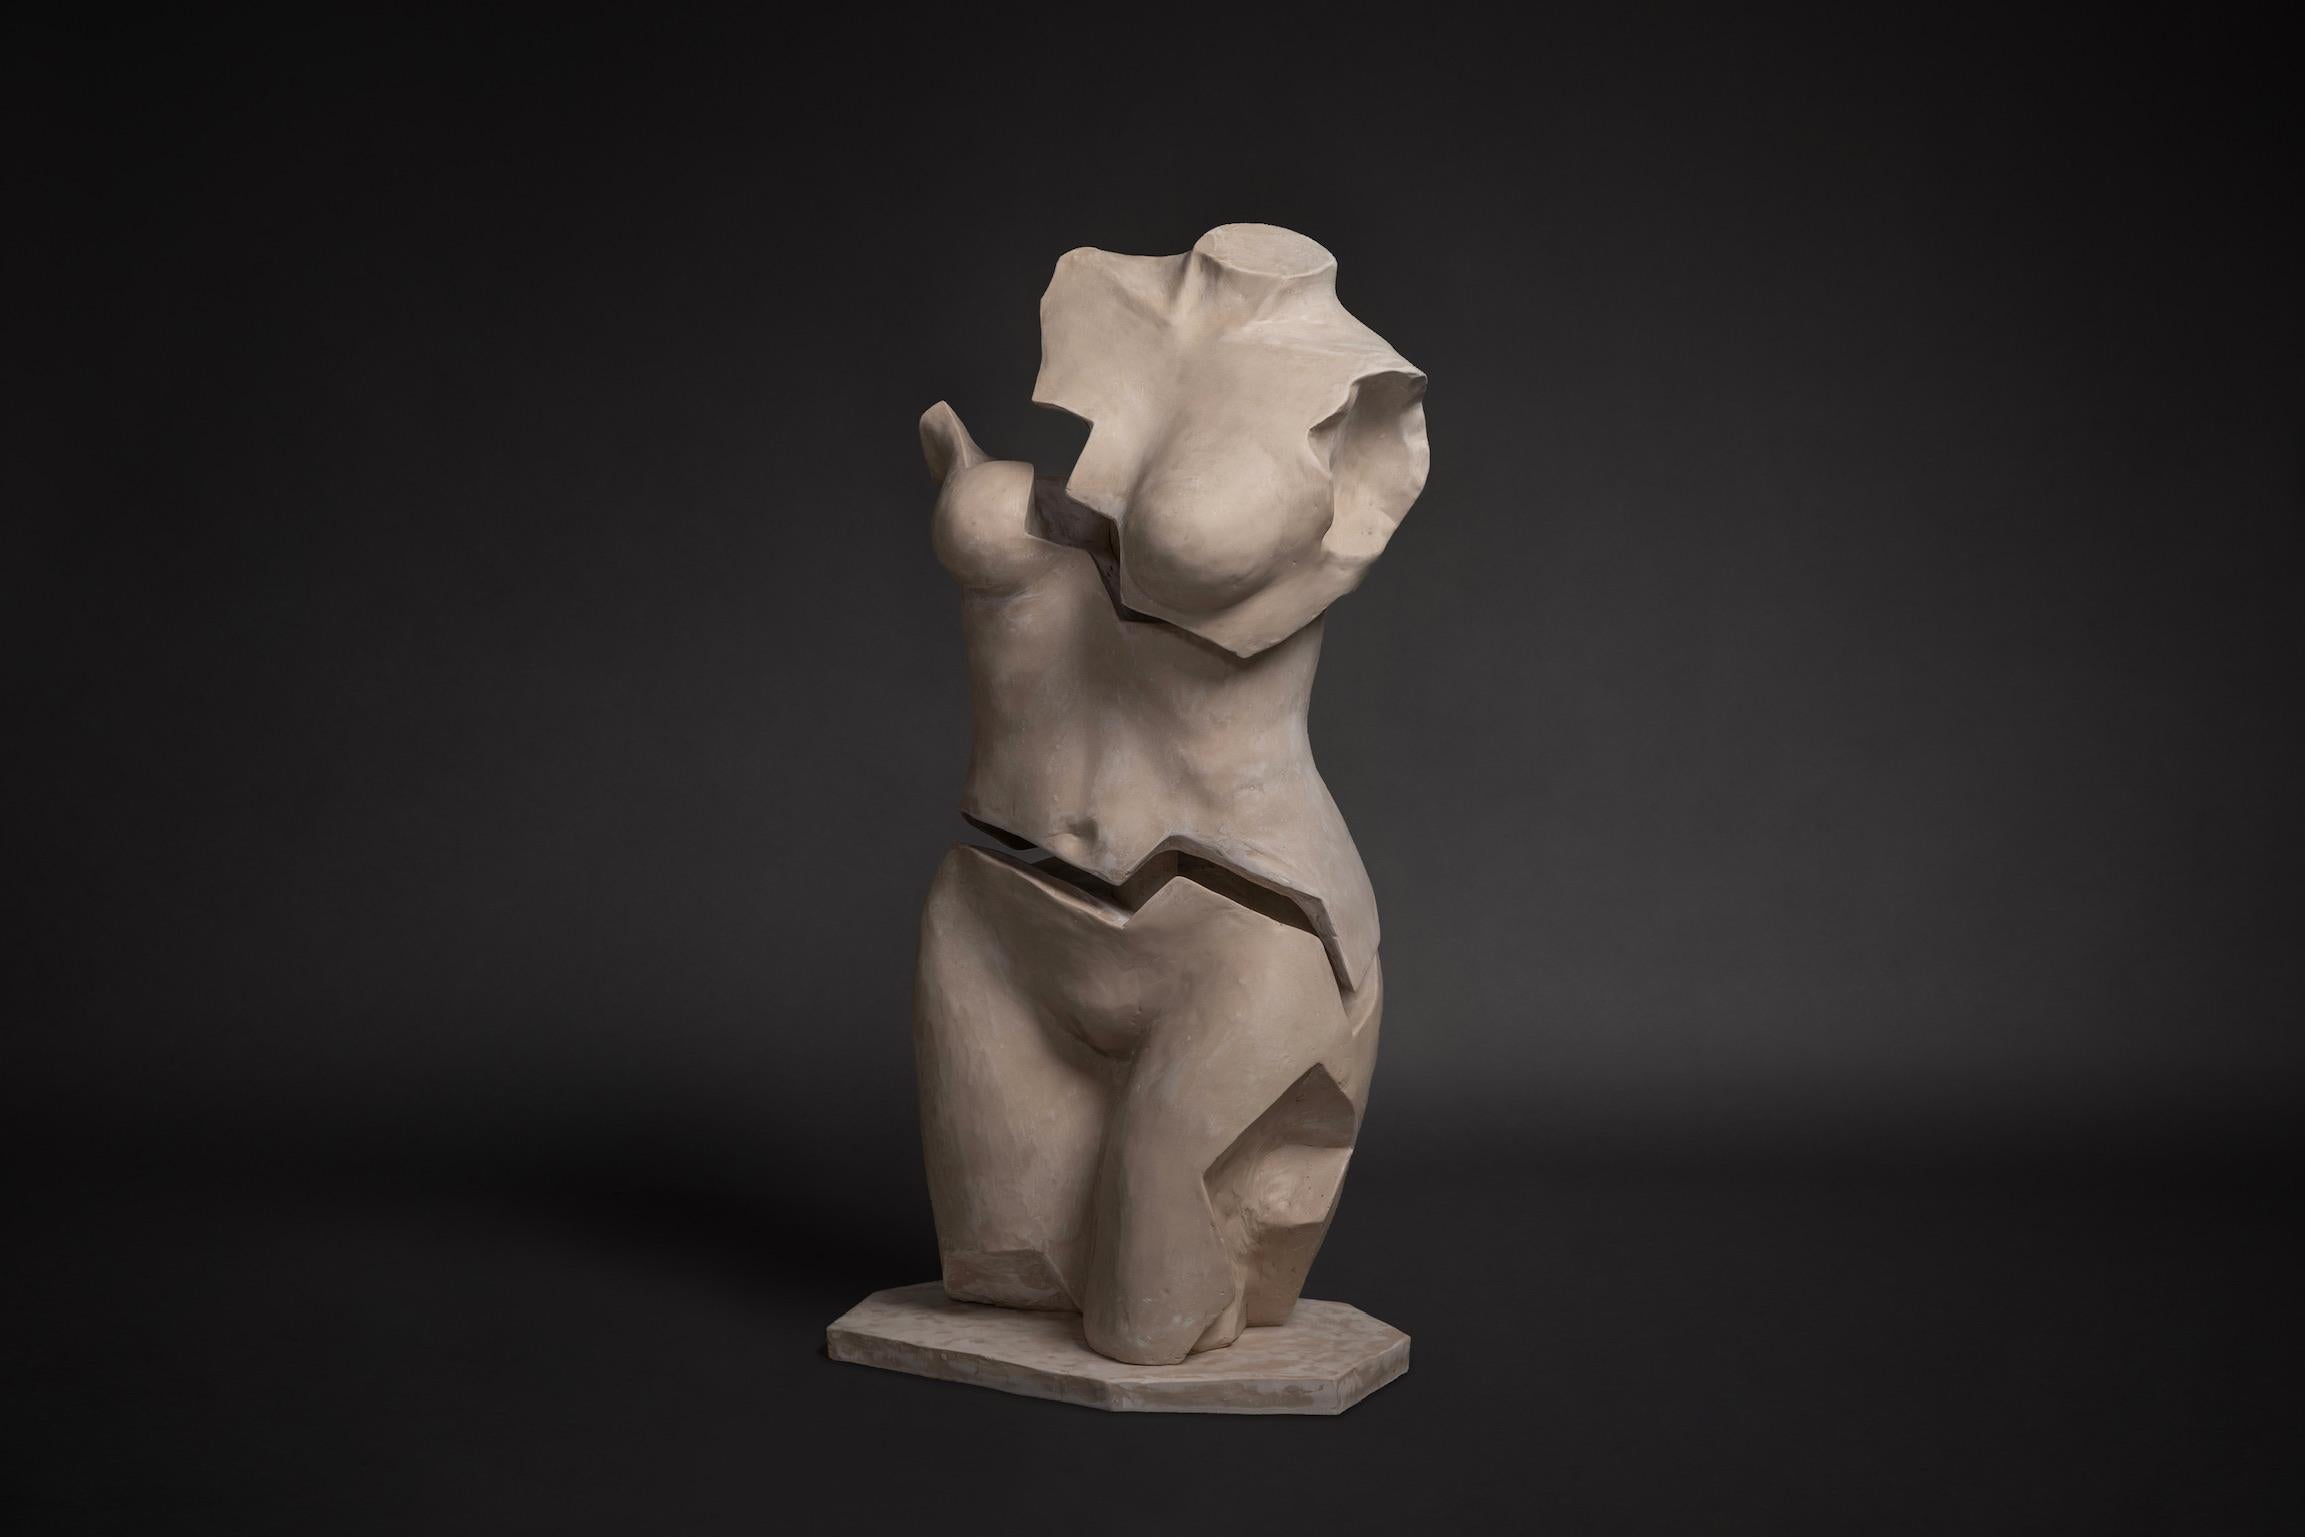 In continuity with her signature explorations of the female form, Marcela Cure introduces a new sculptural memento that sheds light upon the mulling yet beauteous intricacies in womanhood. Through hand-sculpted and hand-cast fragments that yield an